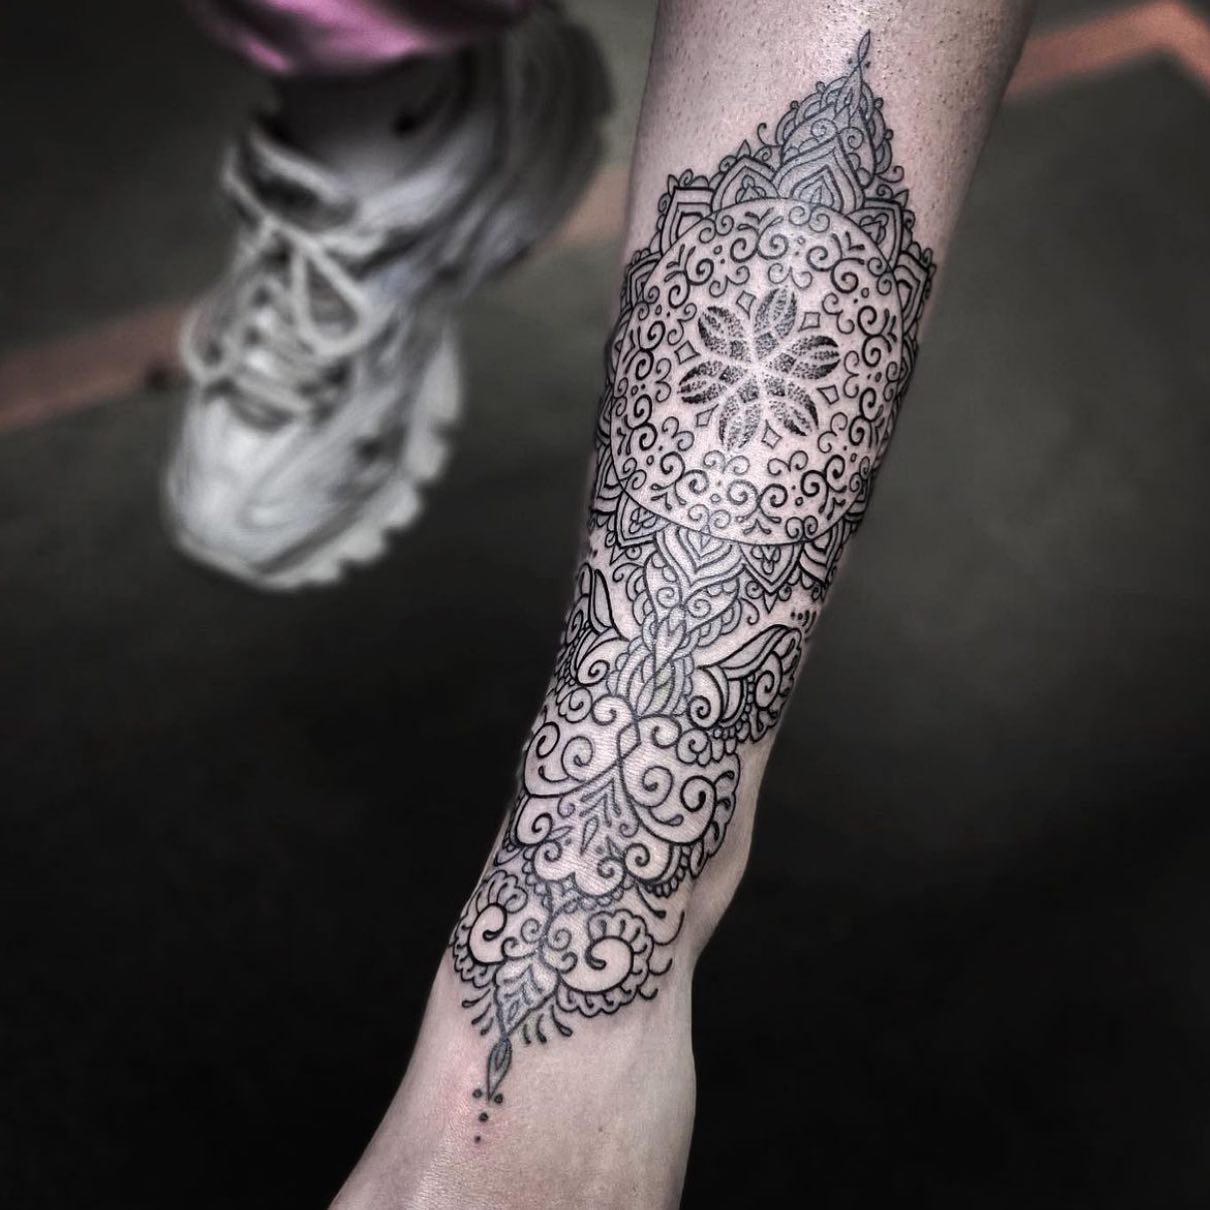 Intricate ornamental piece by marcdiamondtattoo 🔥

If you would like to get tattooed, then please fill out the tattoo enquiry form on our website 💫

                         totaltattoo barber_dts easytattoo_uk eternalink dynamiccolor lockdownneedle stencilstuff  